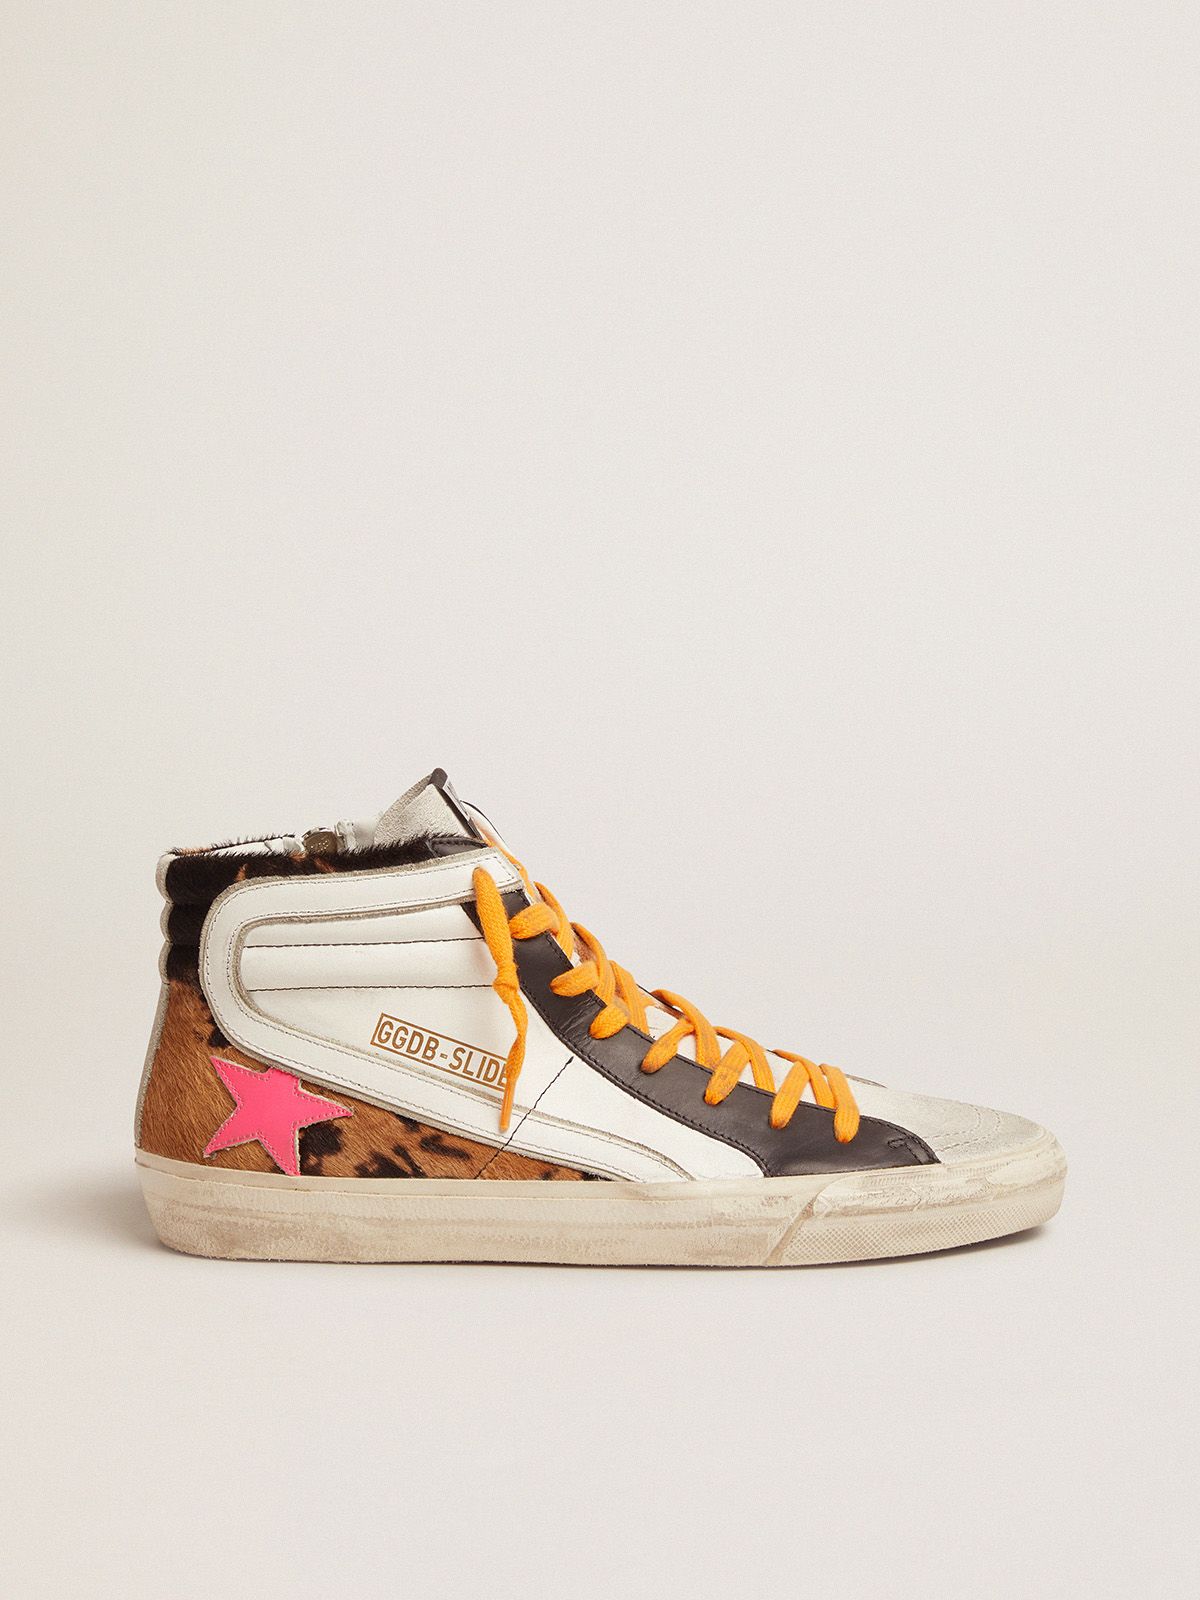 golden goose Slide pony and star skin, sneakers leather suede in with orange fuchsia laces a